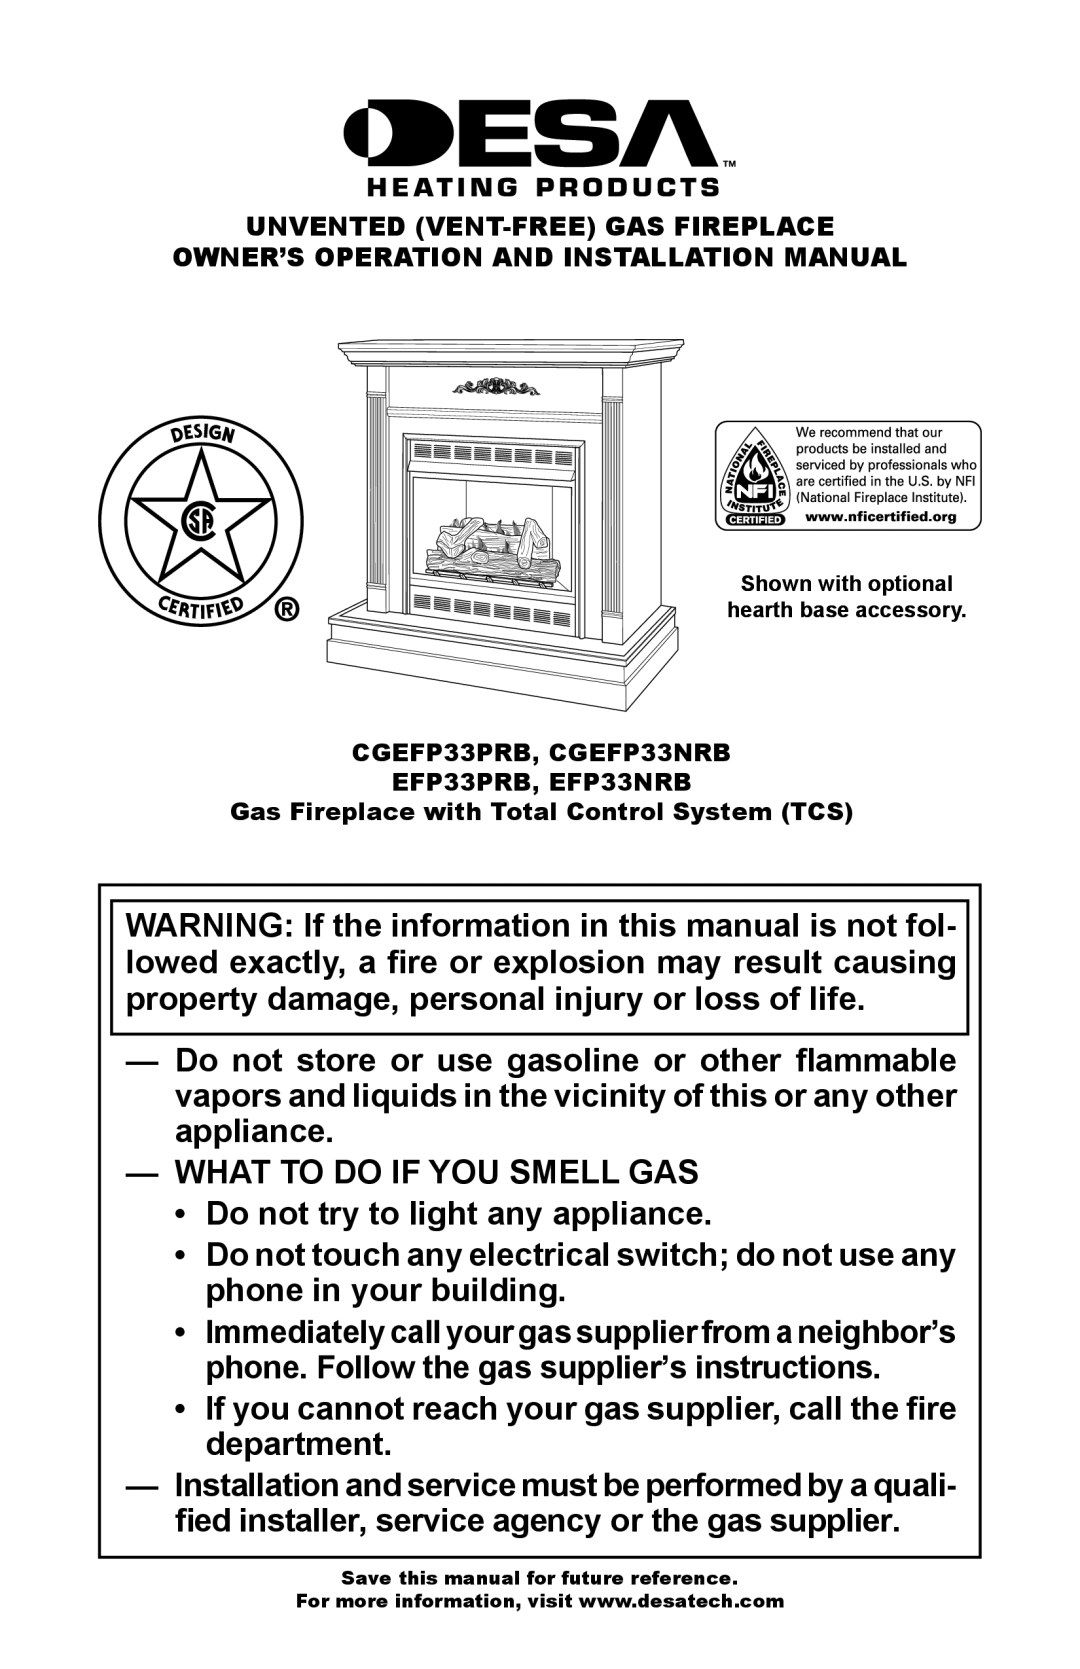 Desa CGEFP33PRB, CGEFP33NRB, EFP33PRB, EFP33NRB installation manual What To Do If You Smell Gas 